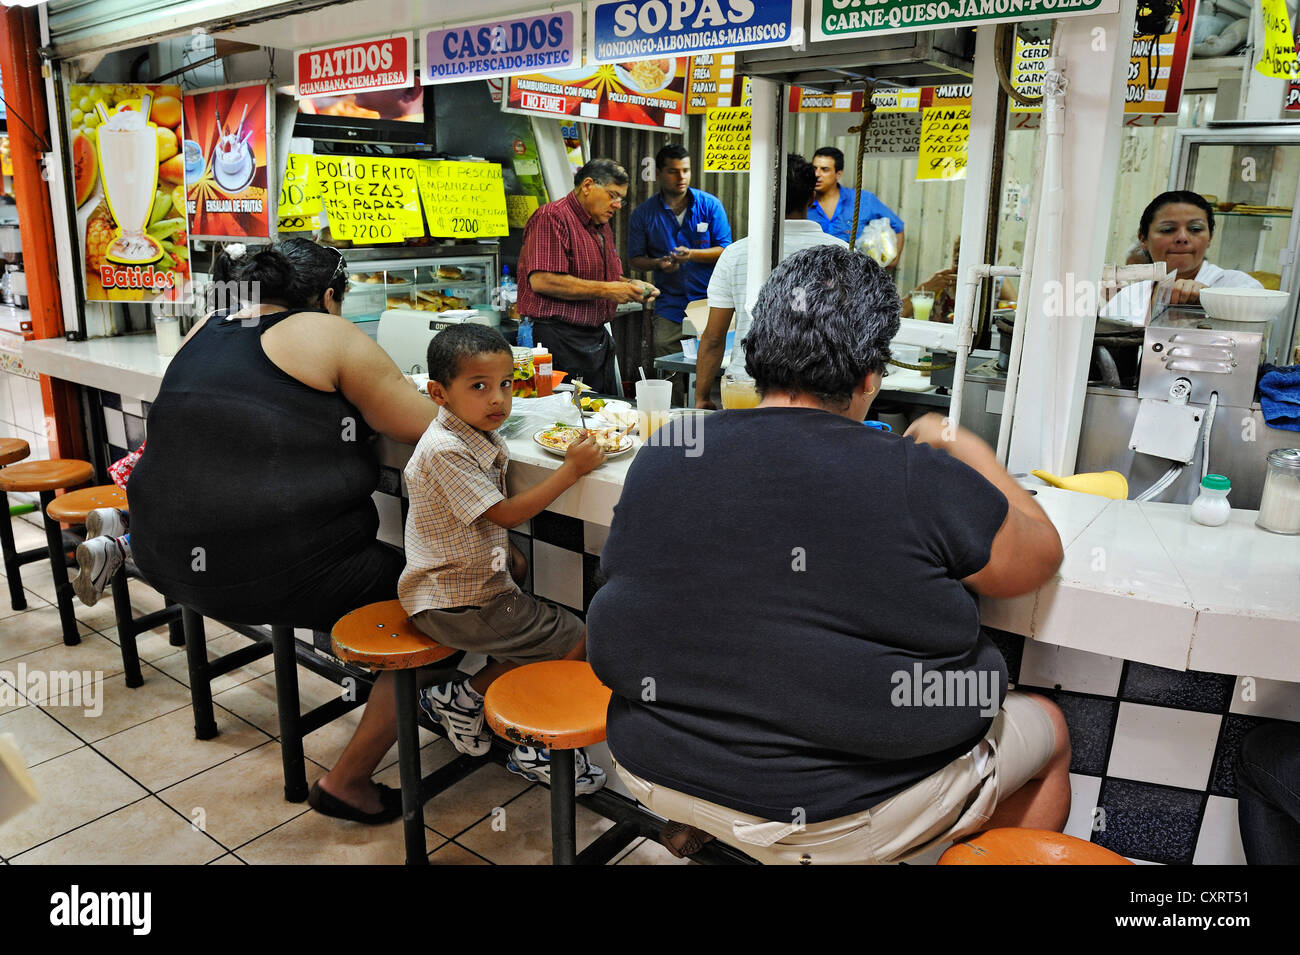 Obese women, fast food restaurant at the Central Market, San José, Costa Rica, Central America Stock Photo